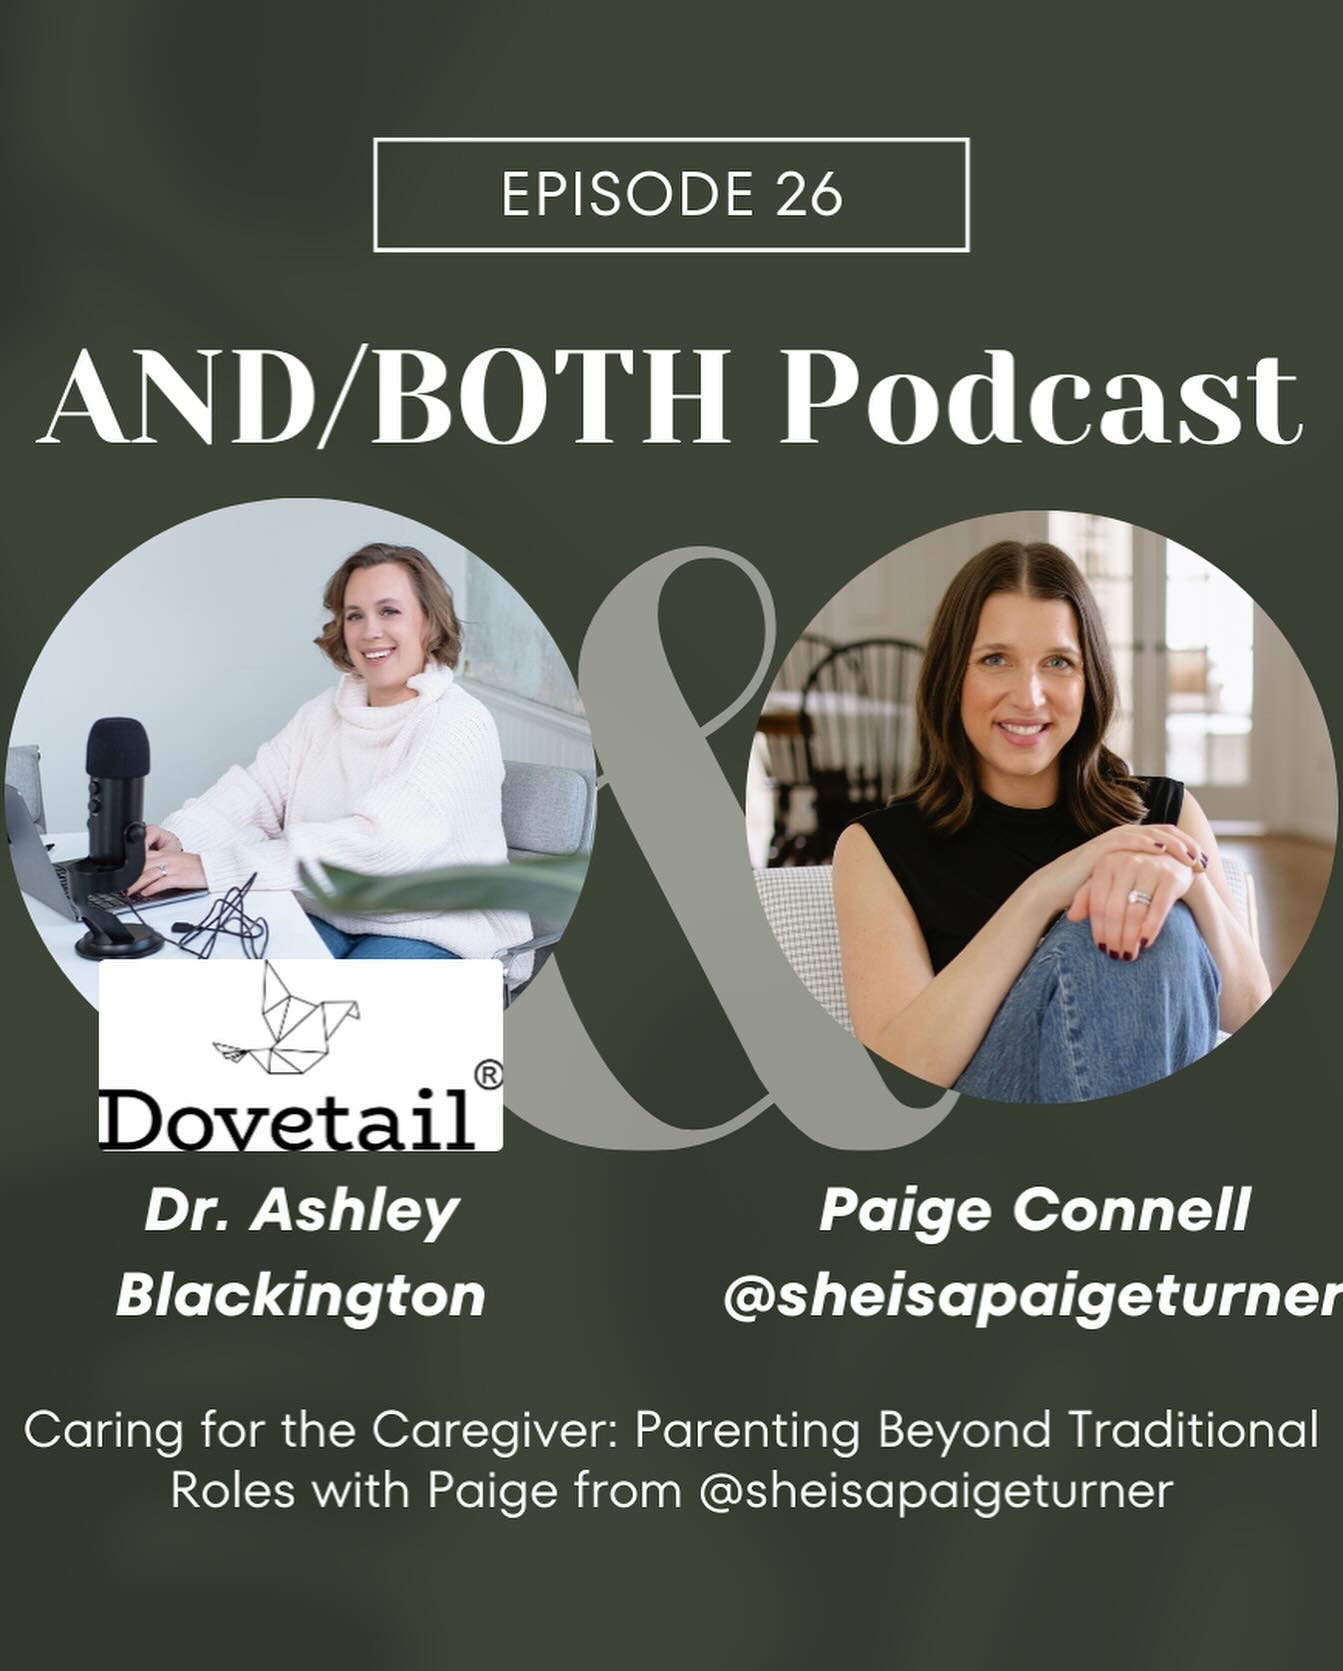 Friday is new episode release day and the kick off of season 2 of the AND/BOTH podcast!

This week Paige from @sheisapaigeturner joins me for a wide range of motherhood and parenting topics- career and motherhood, rising childcare costs, role equity,